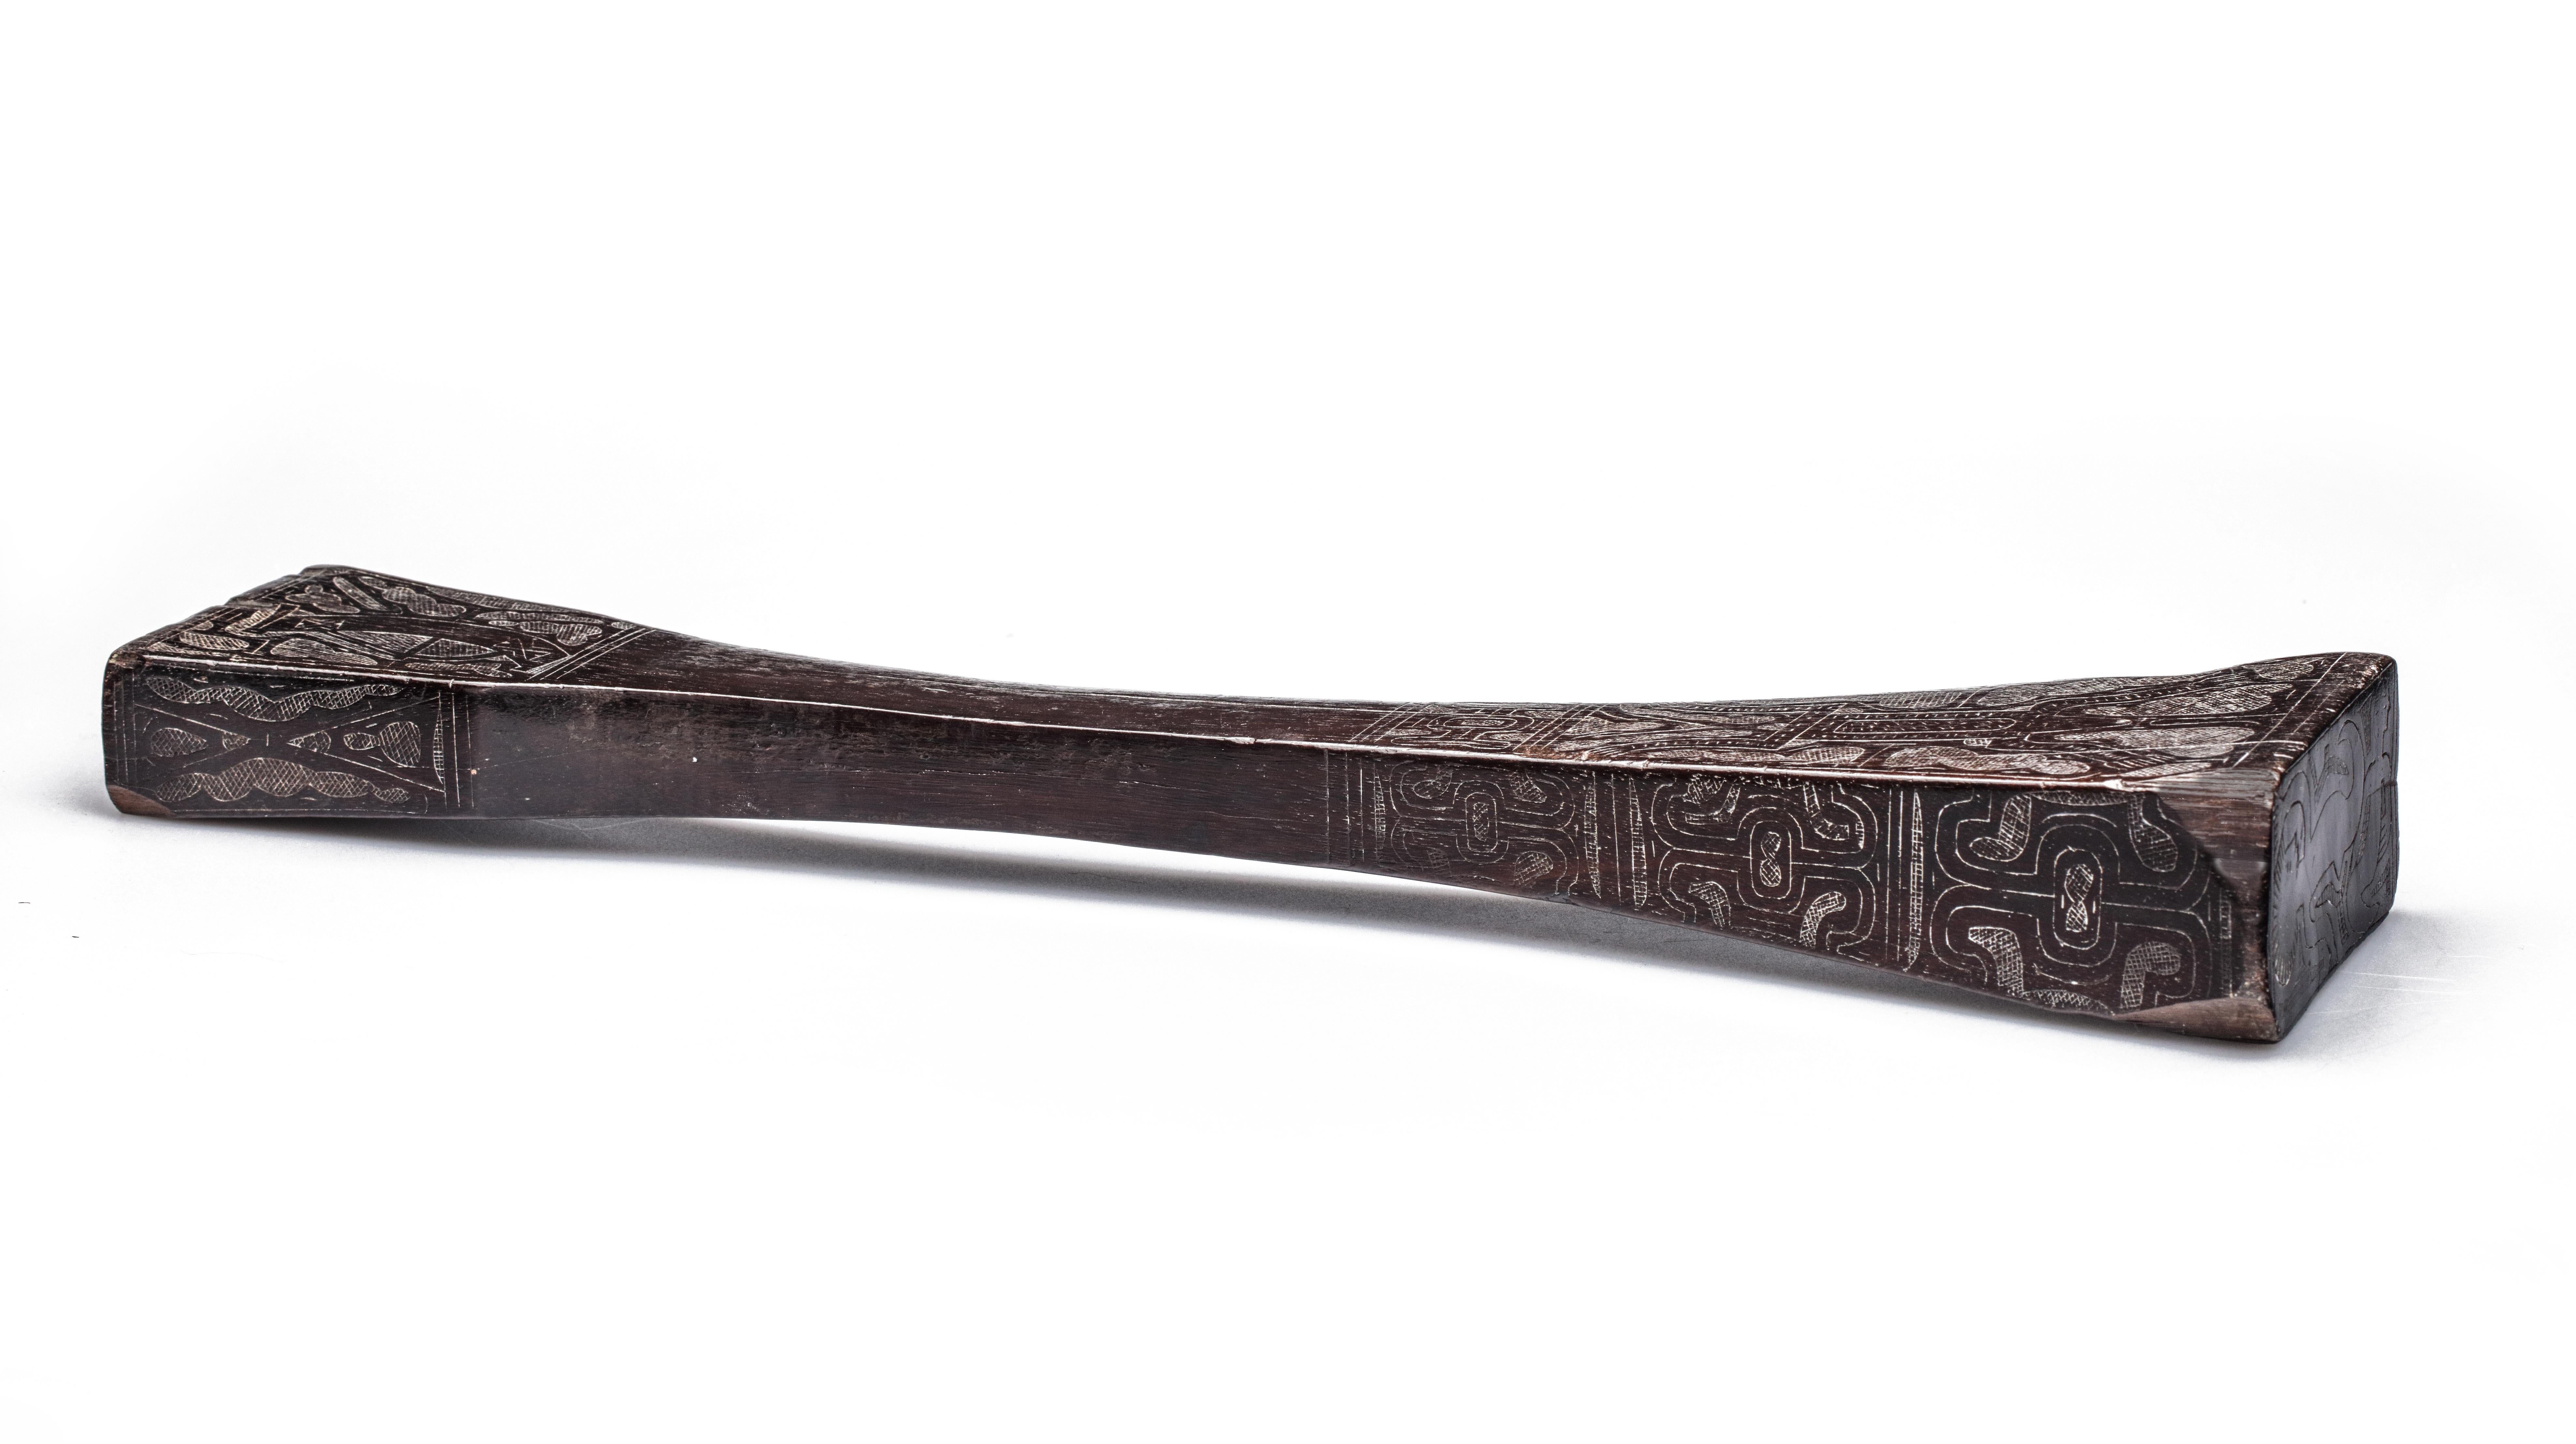 A splendid and rare Amazon indigenous wamara wood Macana war-club

Southern-Guyana or Northern Brazil, Wapitxana group of the Aruak peoples, 18th century, possibly earlier

Measure: H. 43 cm

The deep patina of the club present, and the